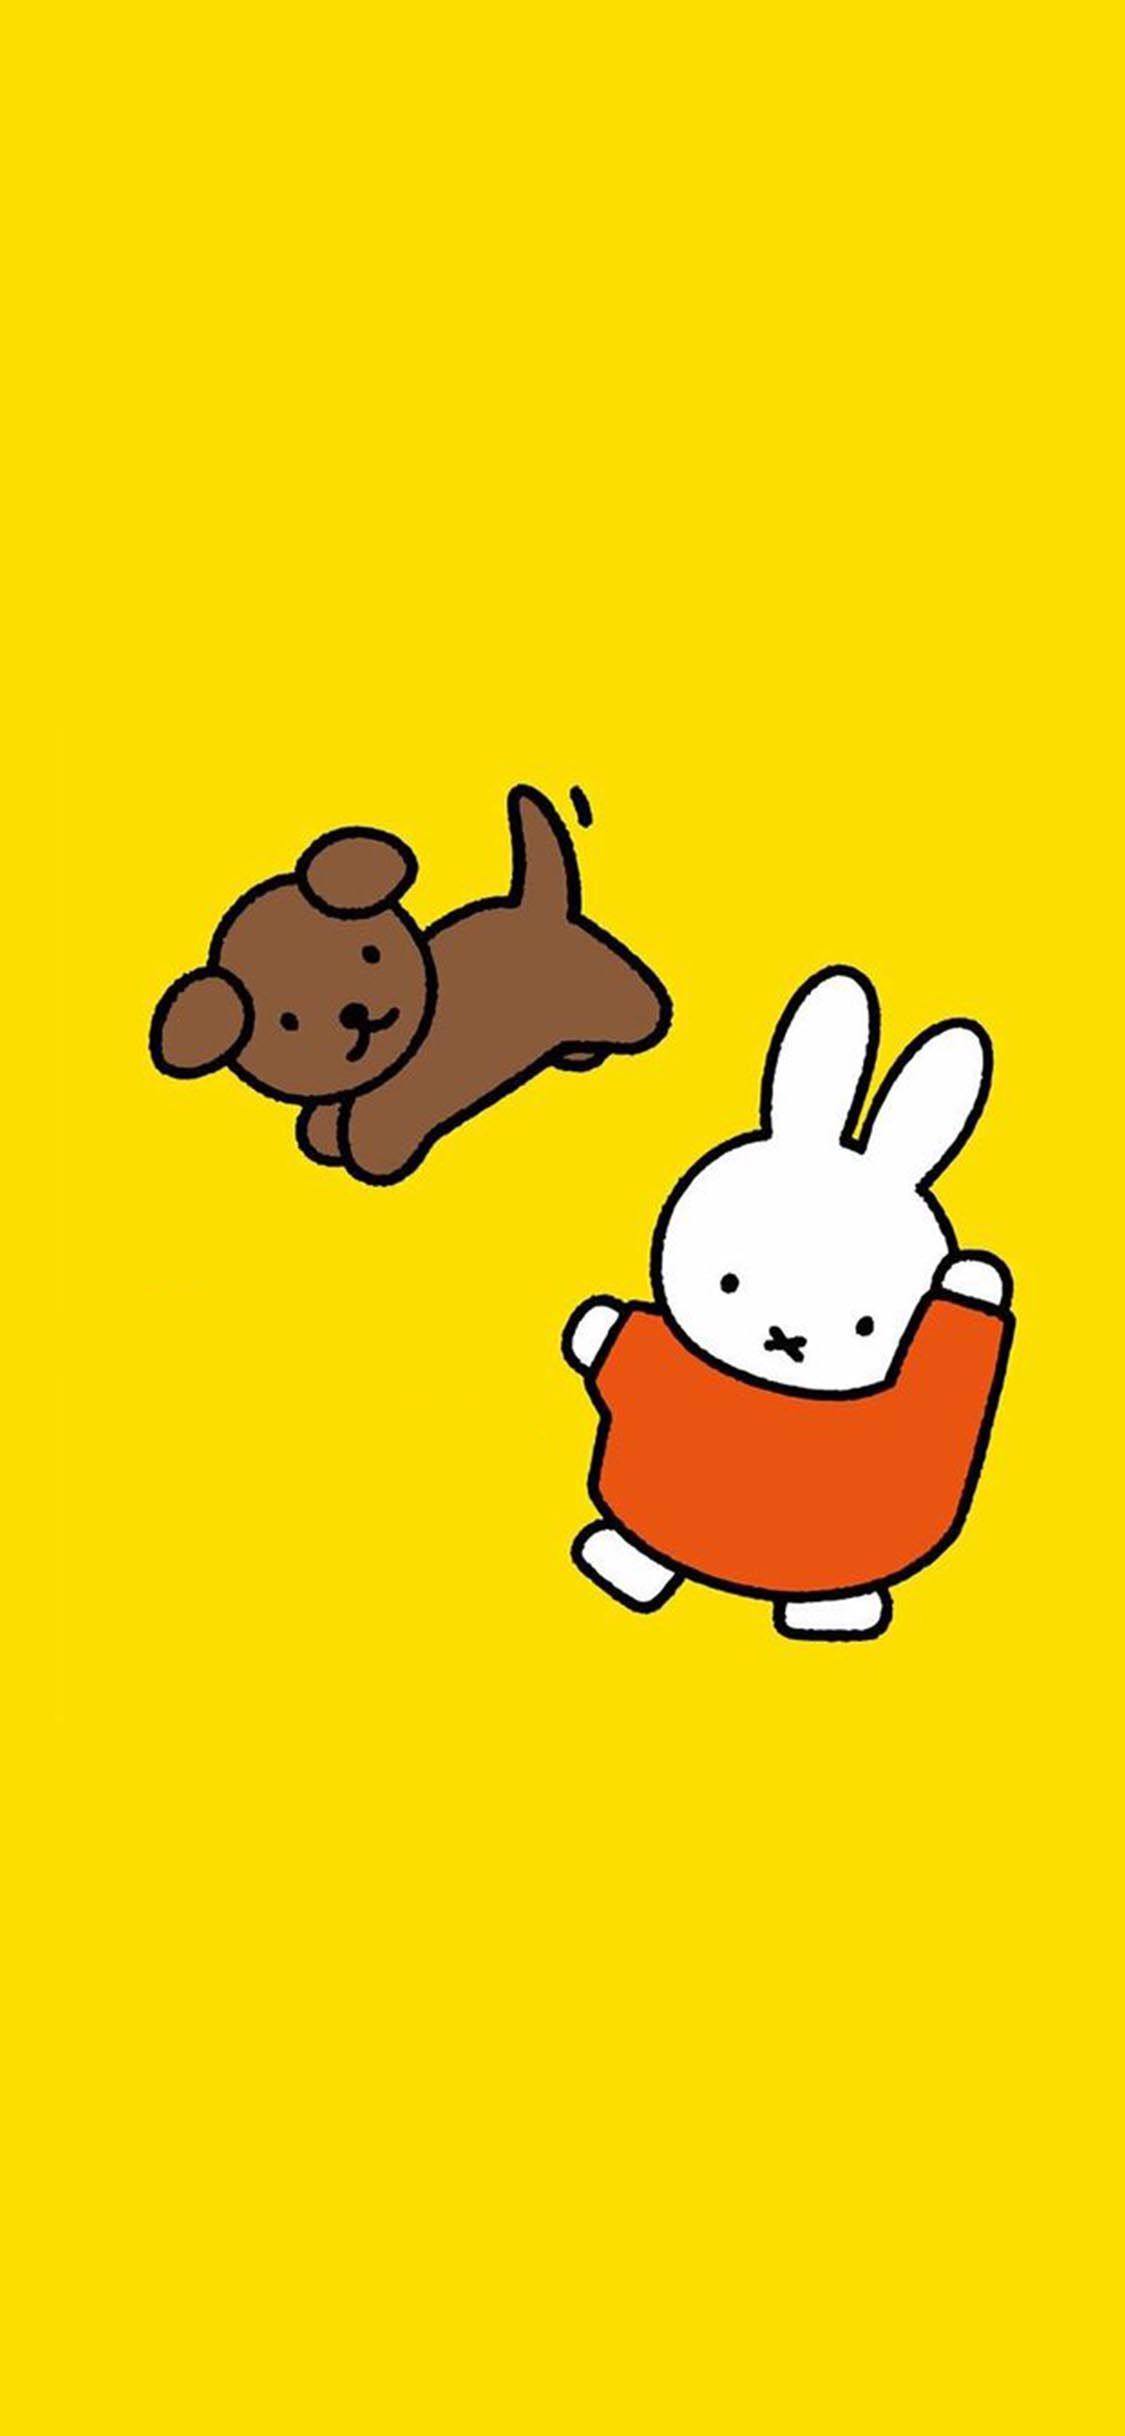 miffy Archives * miki